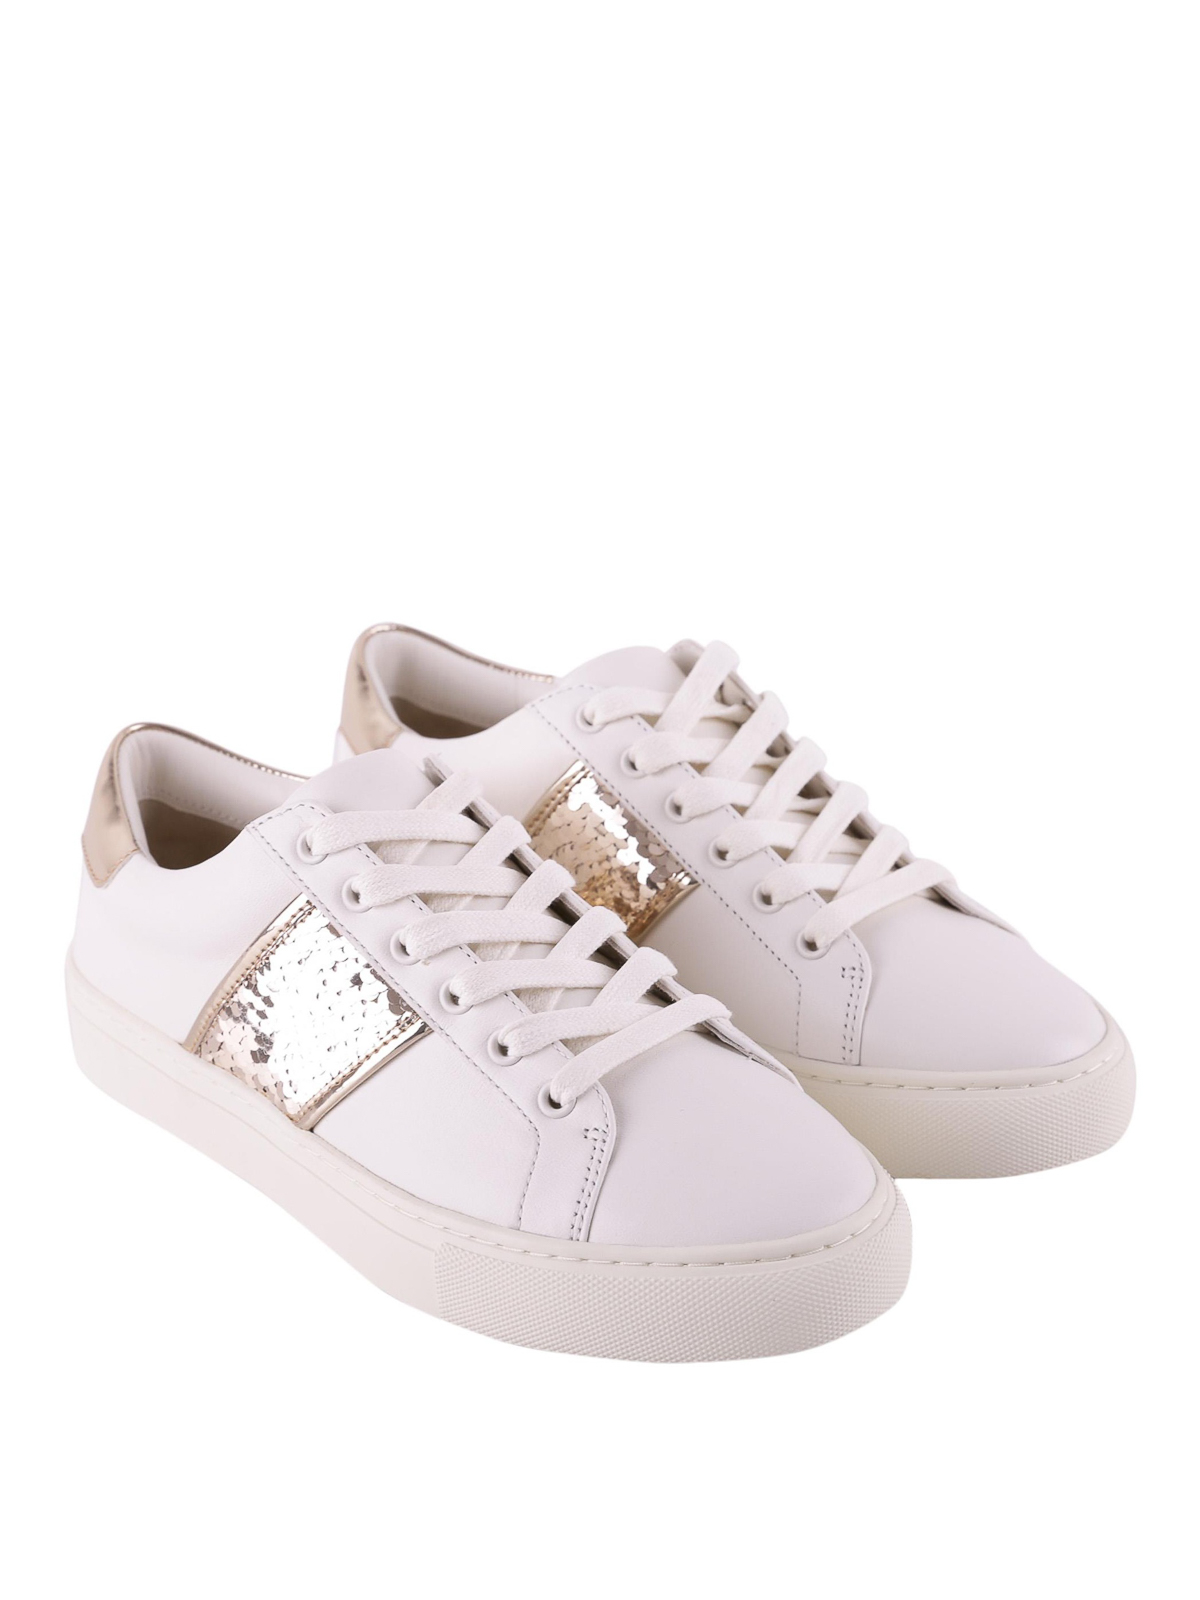 tory burch trainers